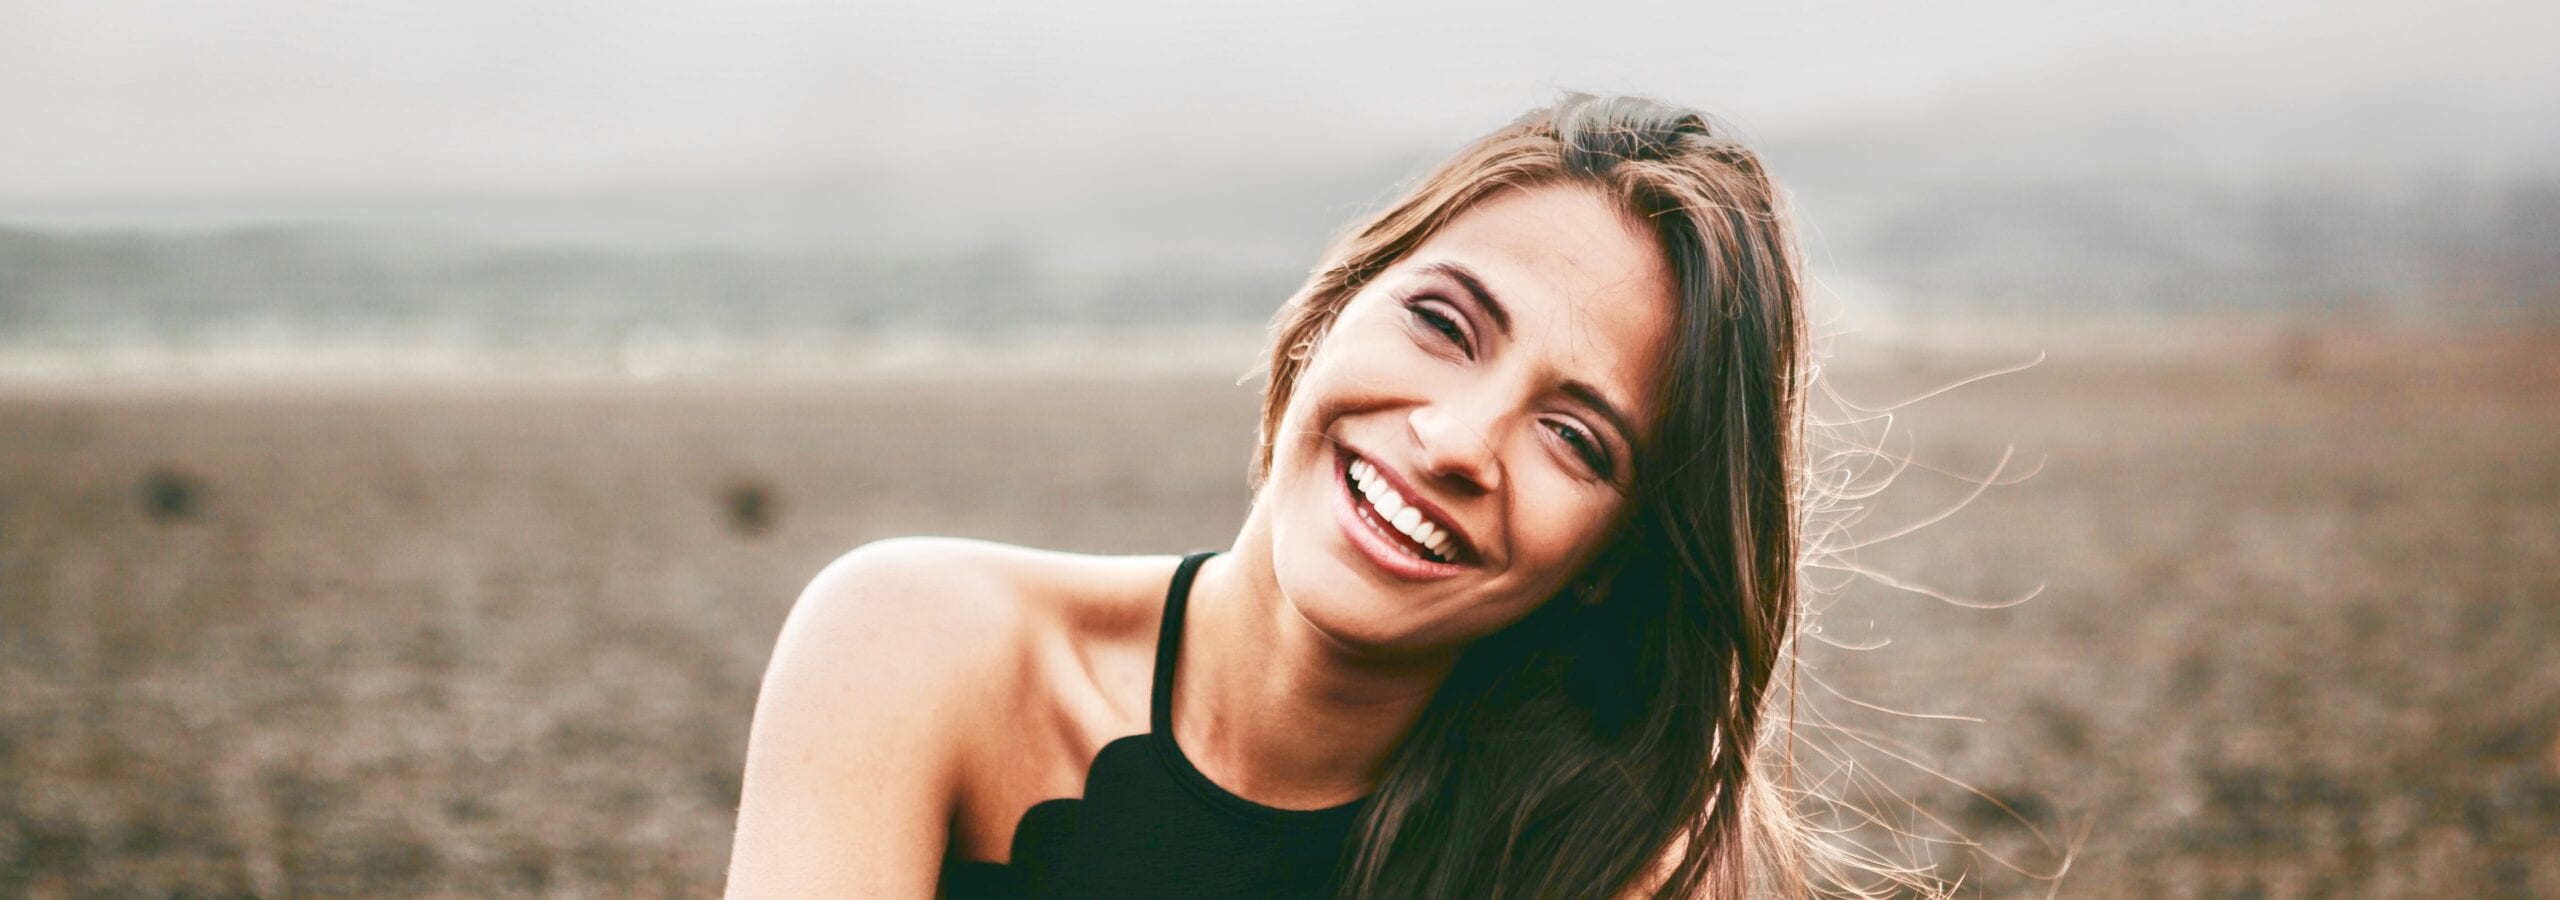 Smiling girl with mountain background.